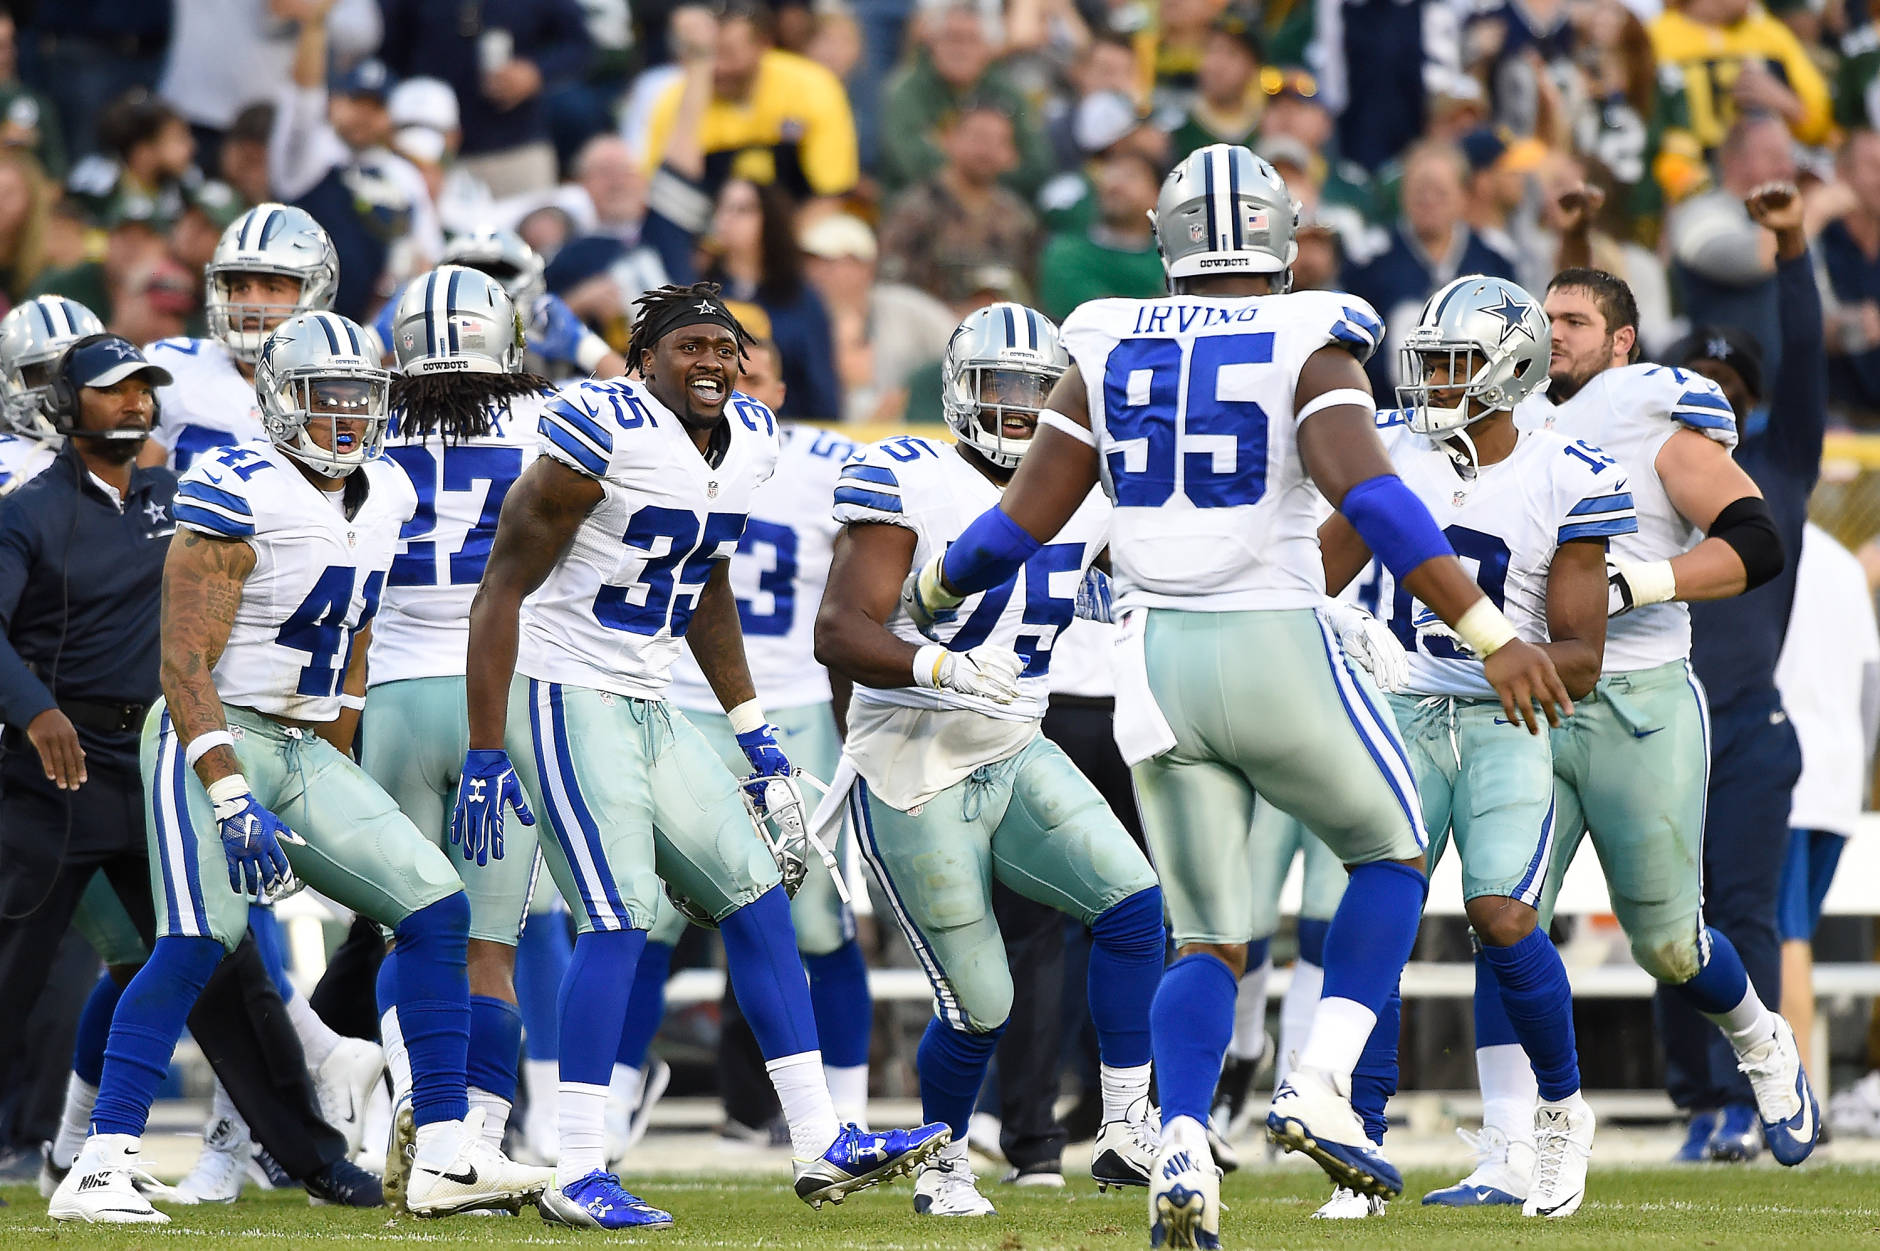 GREEN BAY, WI - OCTOBER 16:  David Irving #95 of the Dallas Cowboys celebrates with his team against the Green Bay Packers during the third quarter at Lambeau Field on October 16, 2016 in Green Bay, Wisconsin. The Dallas Cowboys defeated the Green Bay Packers 30-16.  (Photo by Hannah Foslien/Getty Images)